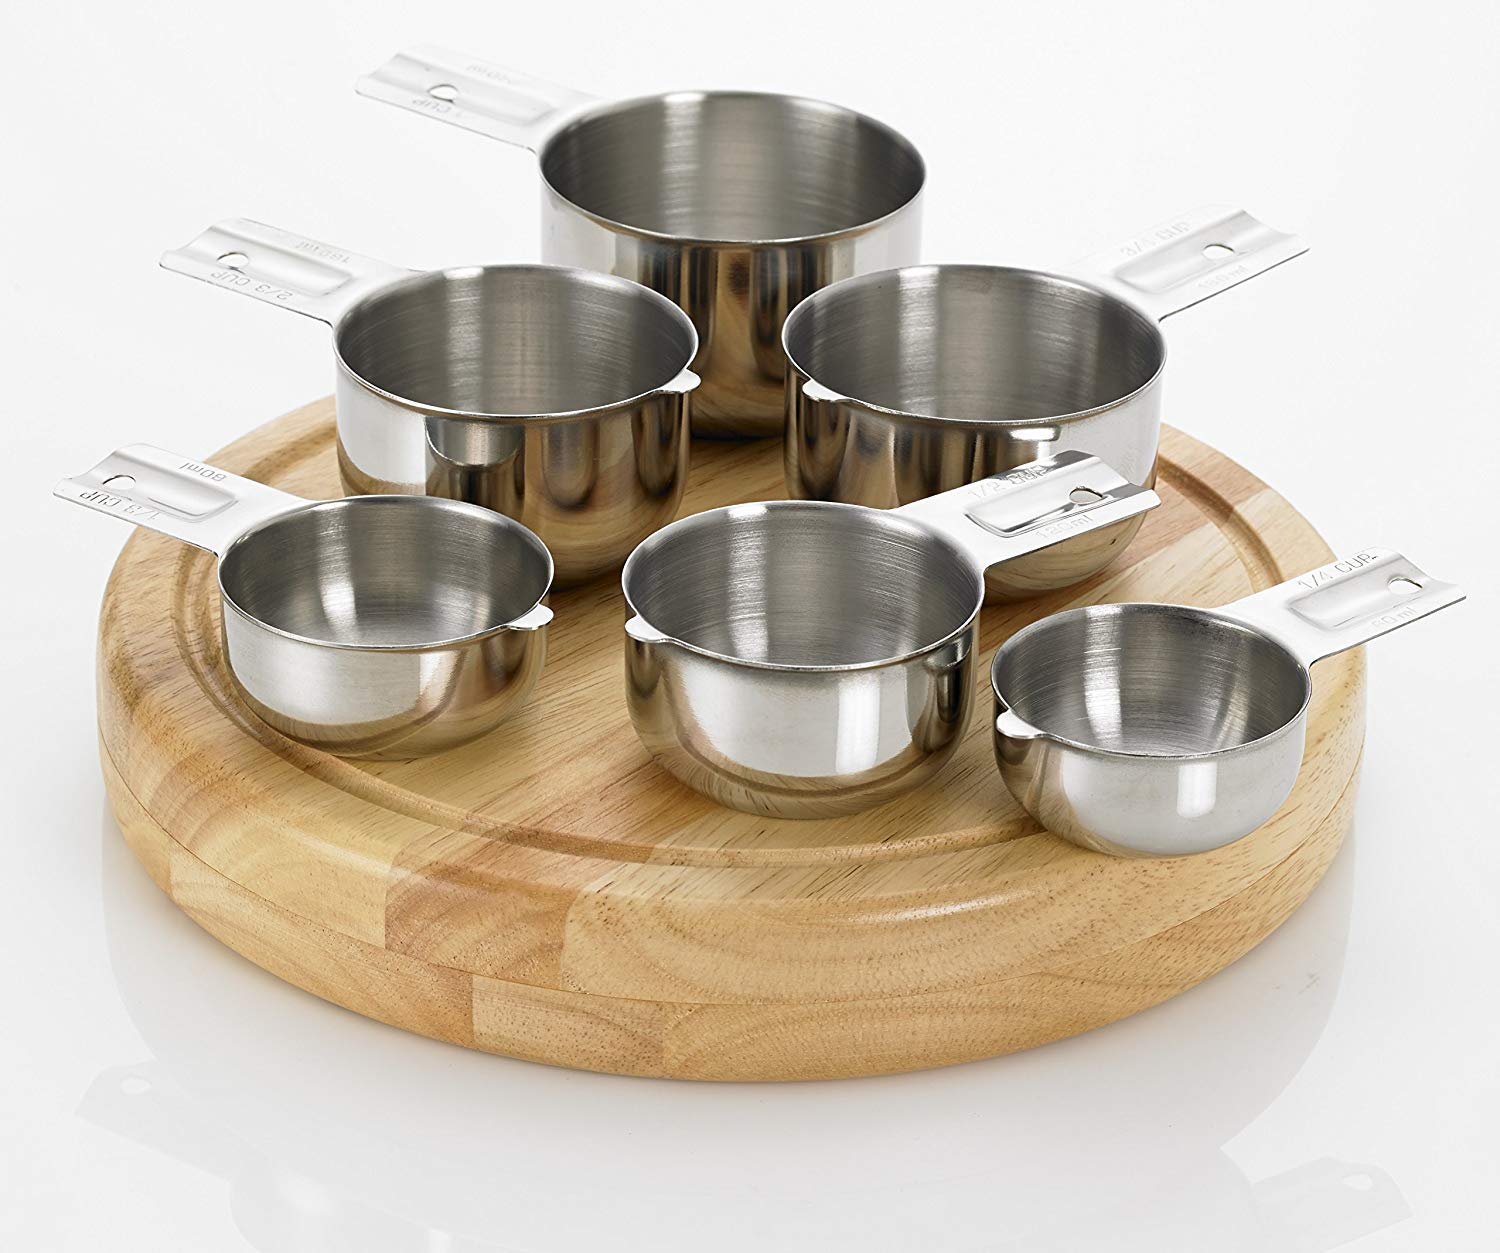 https://www.dontwasteyourmoney.com/wp-content/uploads/2020/02/bellemain-stainless-steel-measuring-cup-set-6-piece-measuring-cup-set.jpg